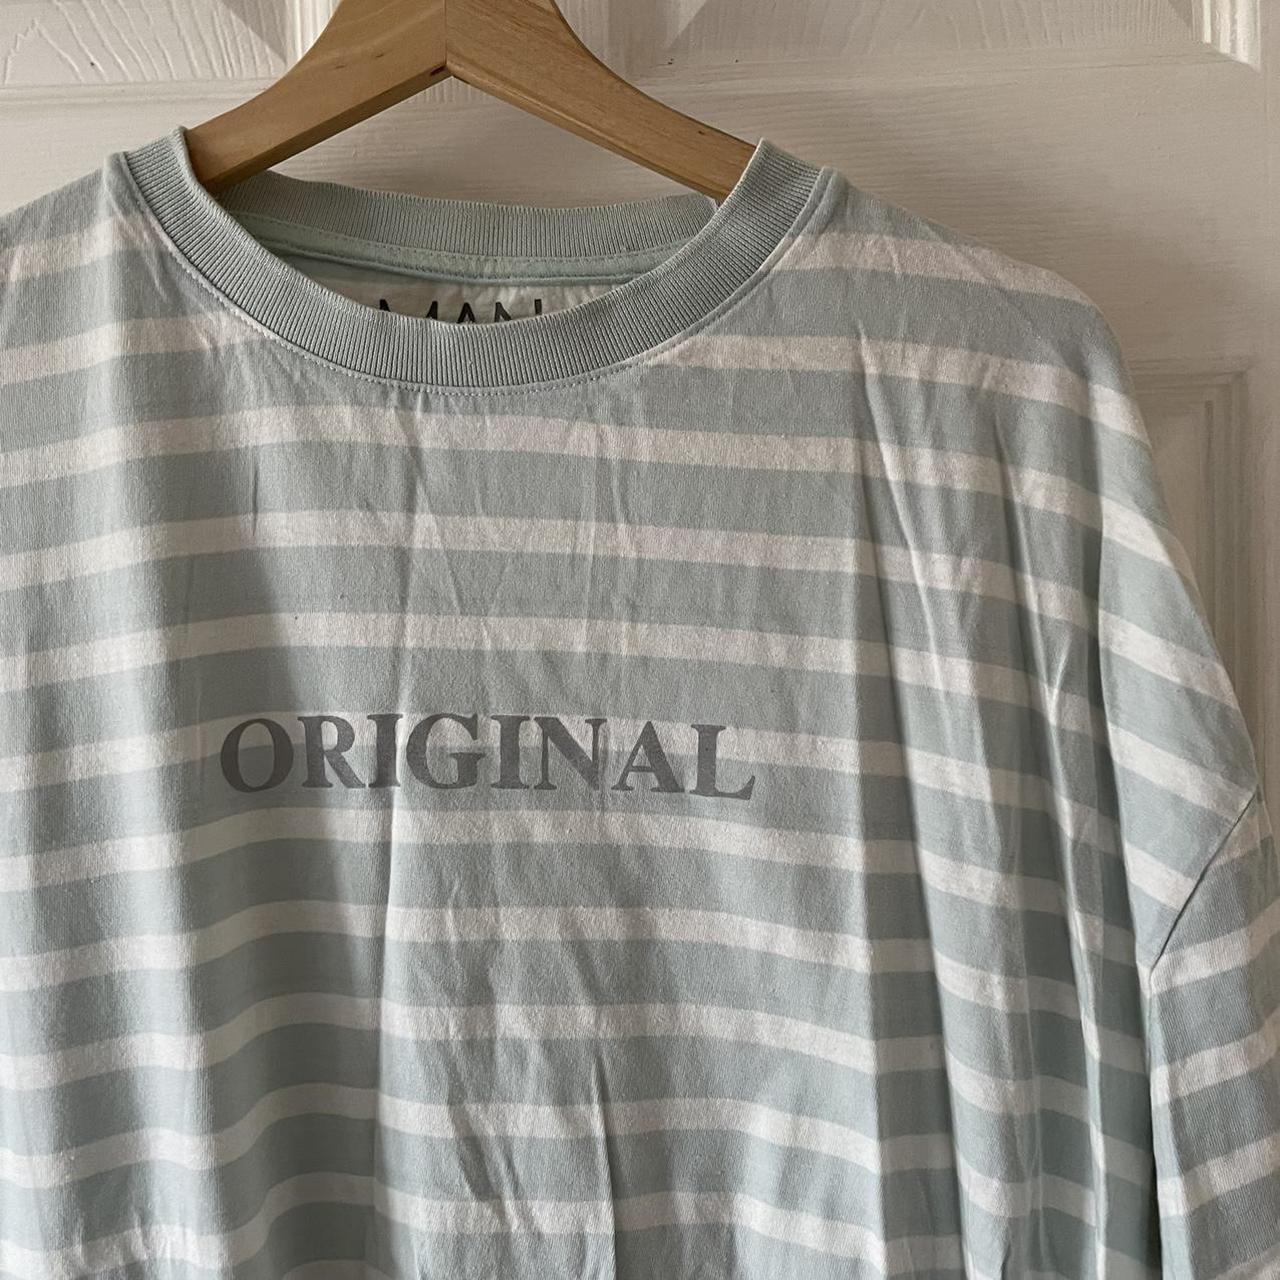 Blue and white stripe t shirt from Boohooman - Depop